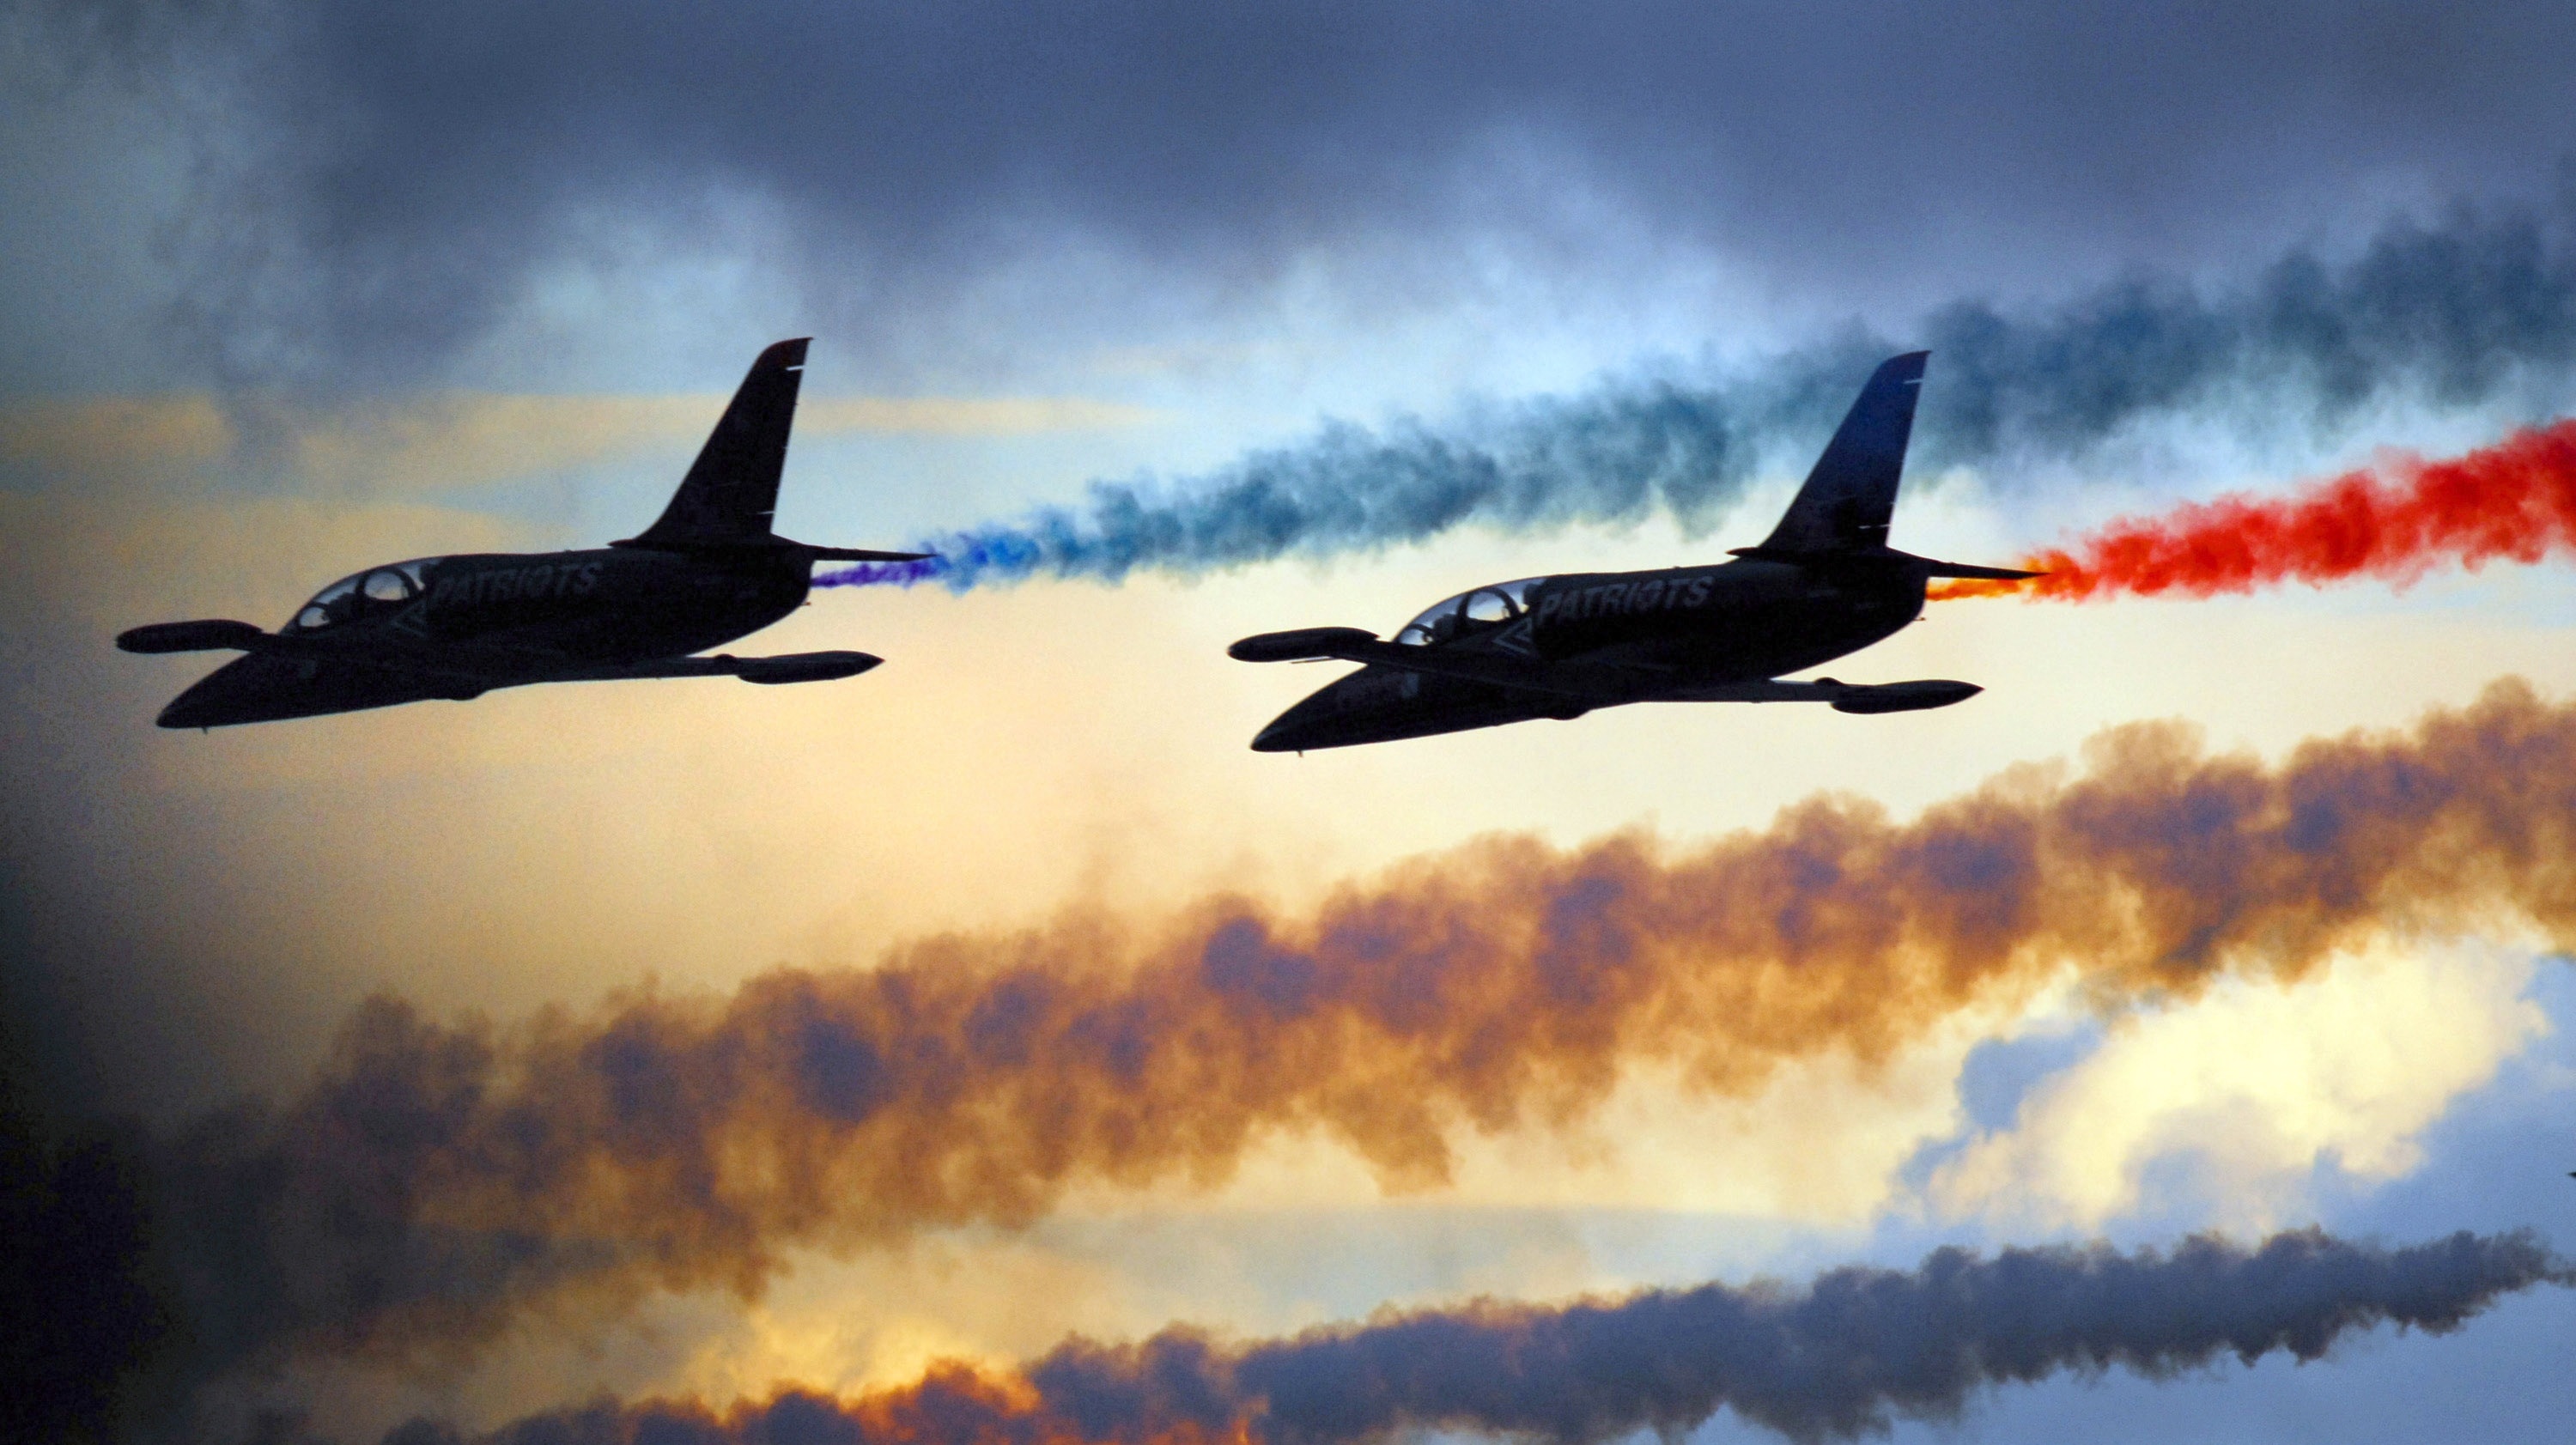 Formation, Air Show, Military, Aircraft, silhouette, flying